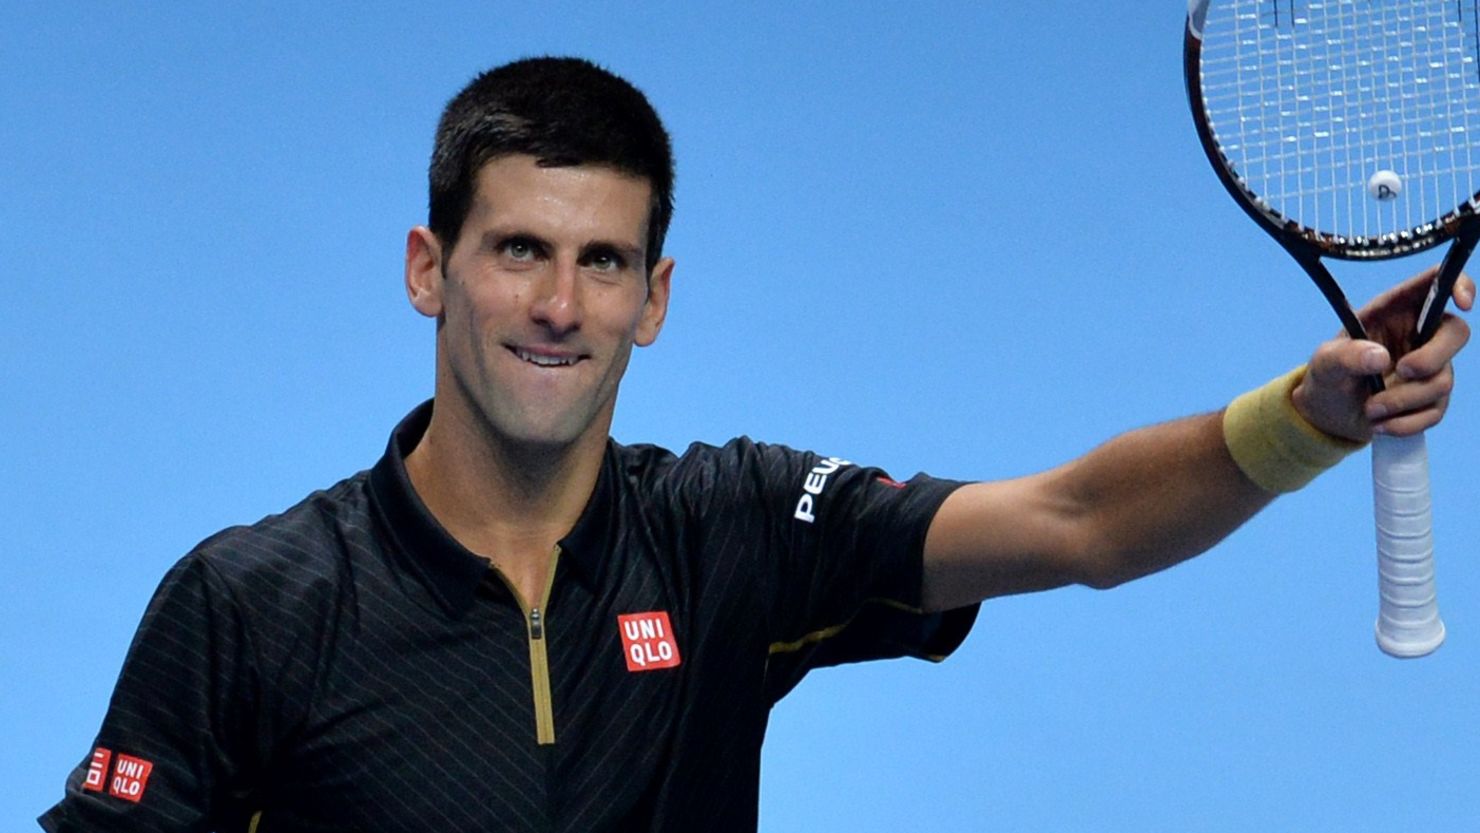 Novak Djokovic was celebrating victory in less than an hour against Marin Cilic at the ATP World Tour Finals. 